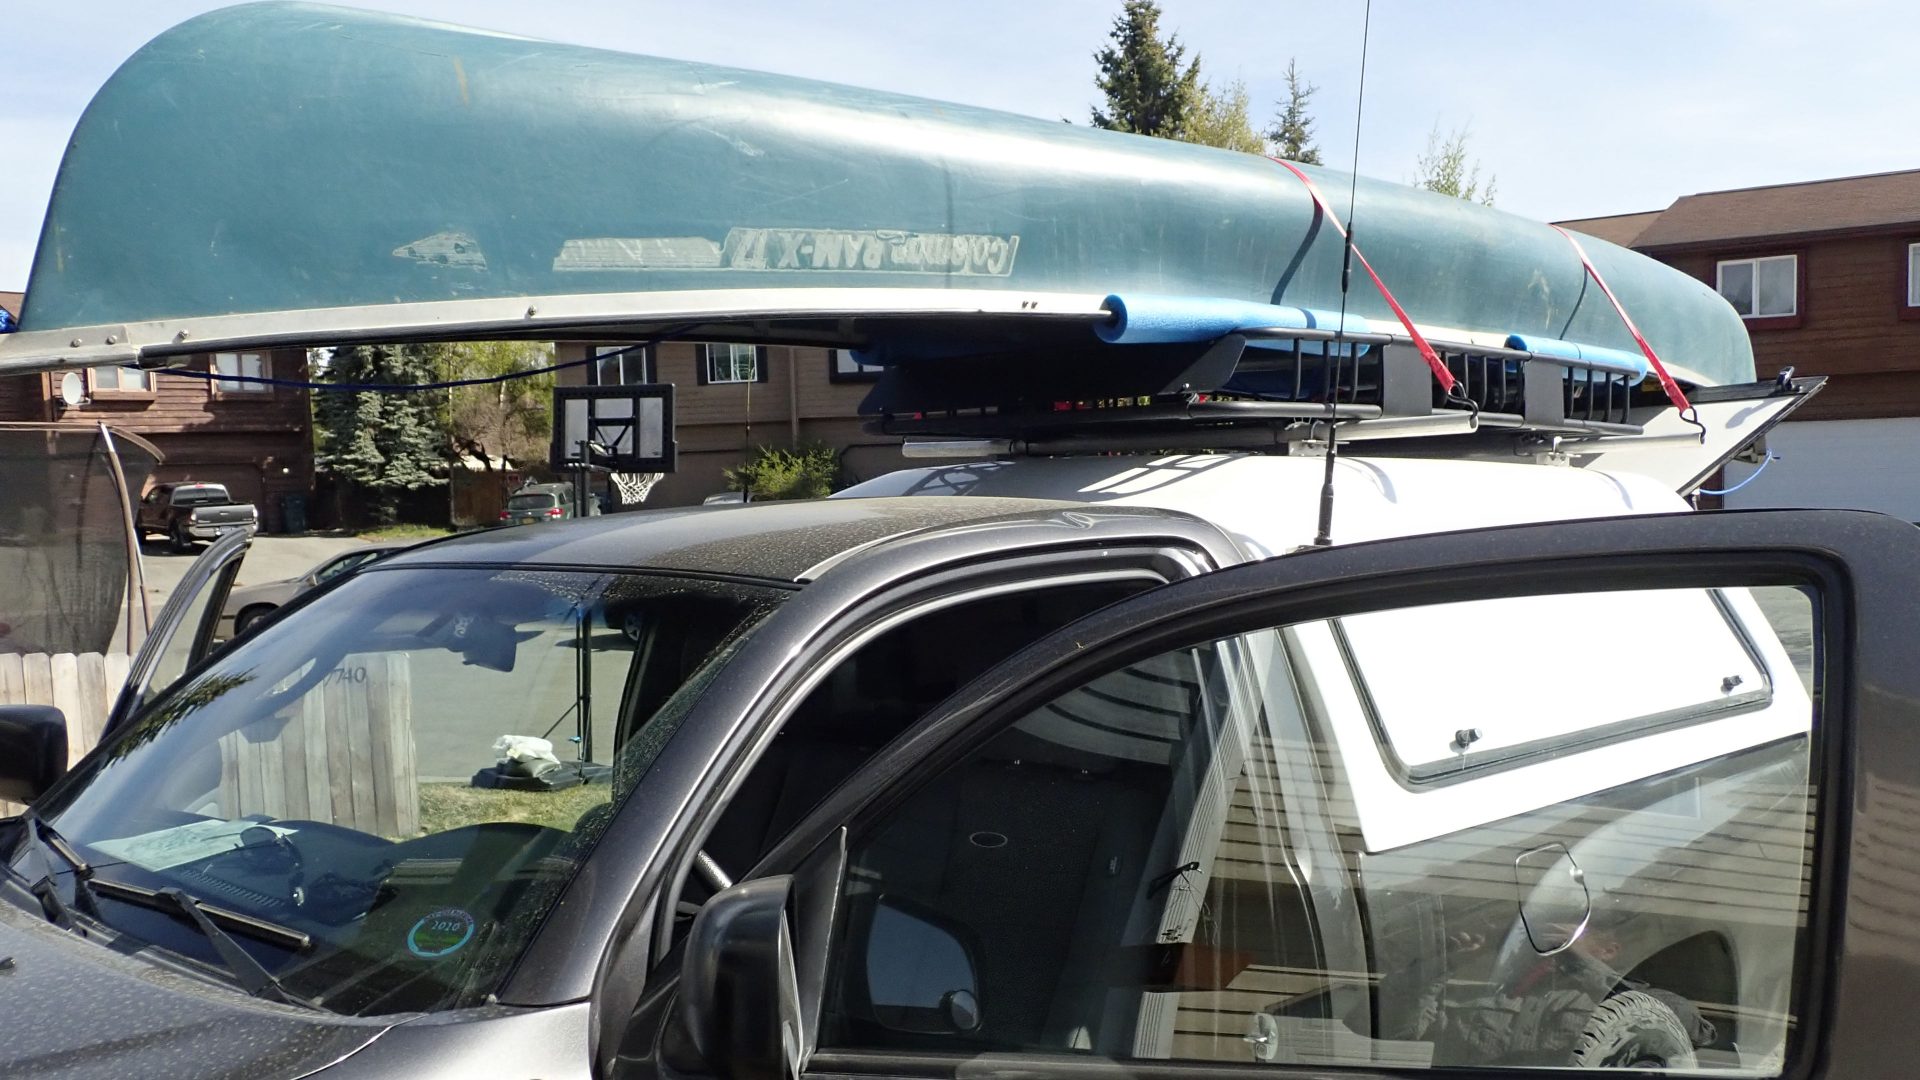 Canoe attached upside down on Toyota pickup truck